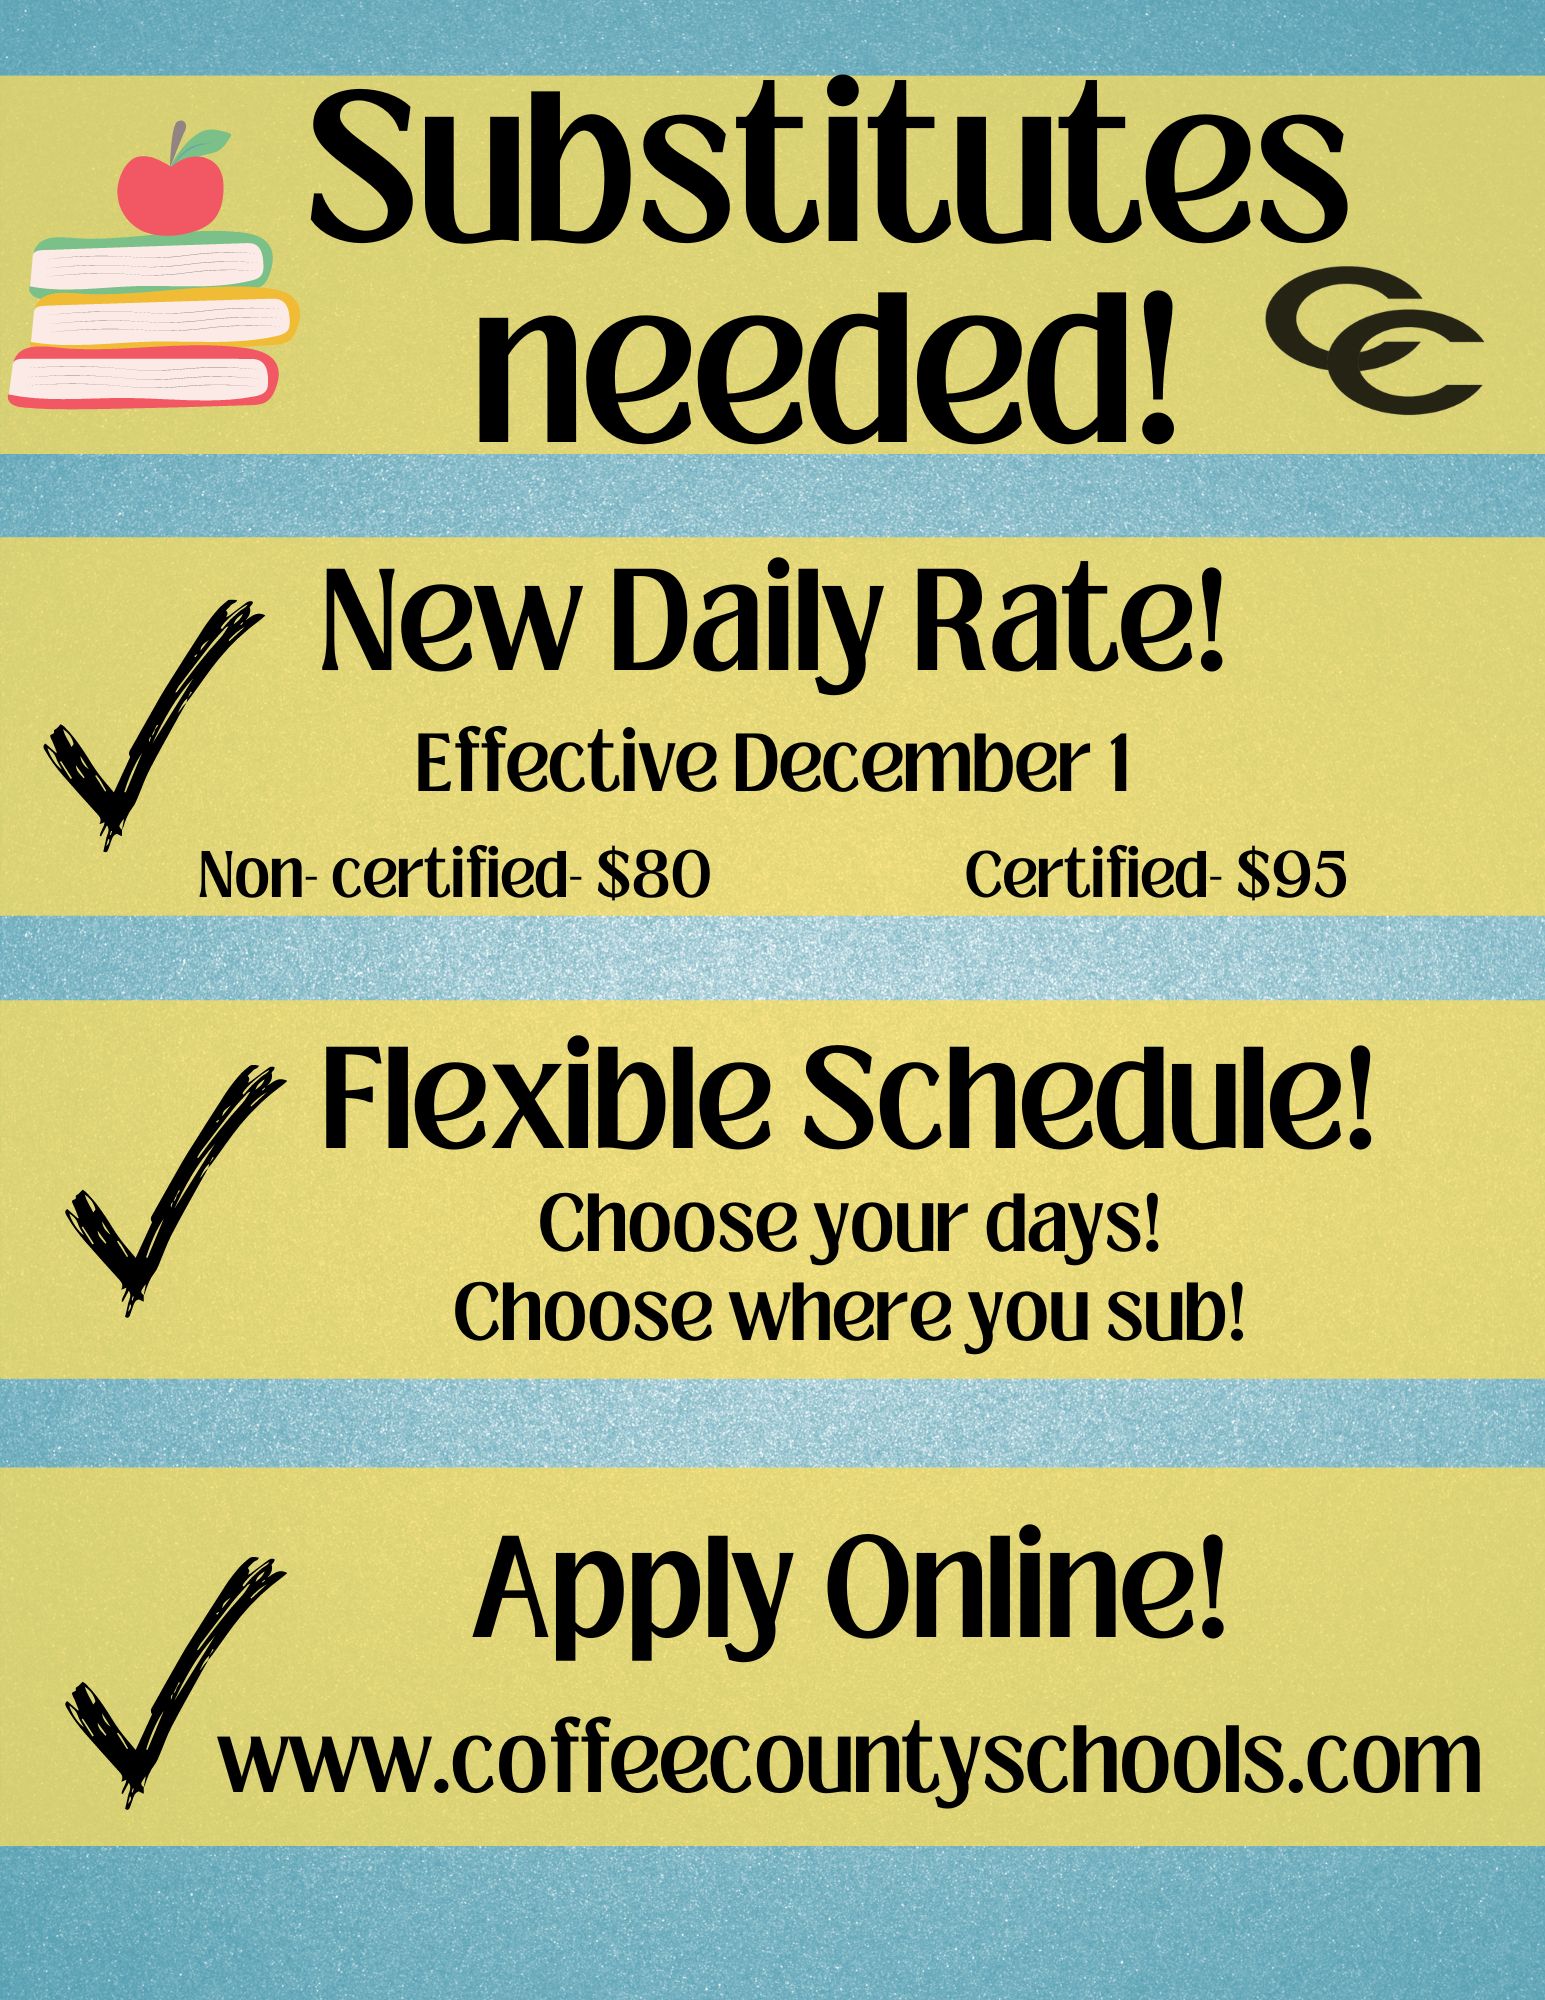 New Daily Rate for Substitutes!